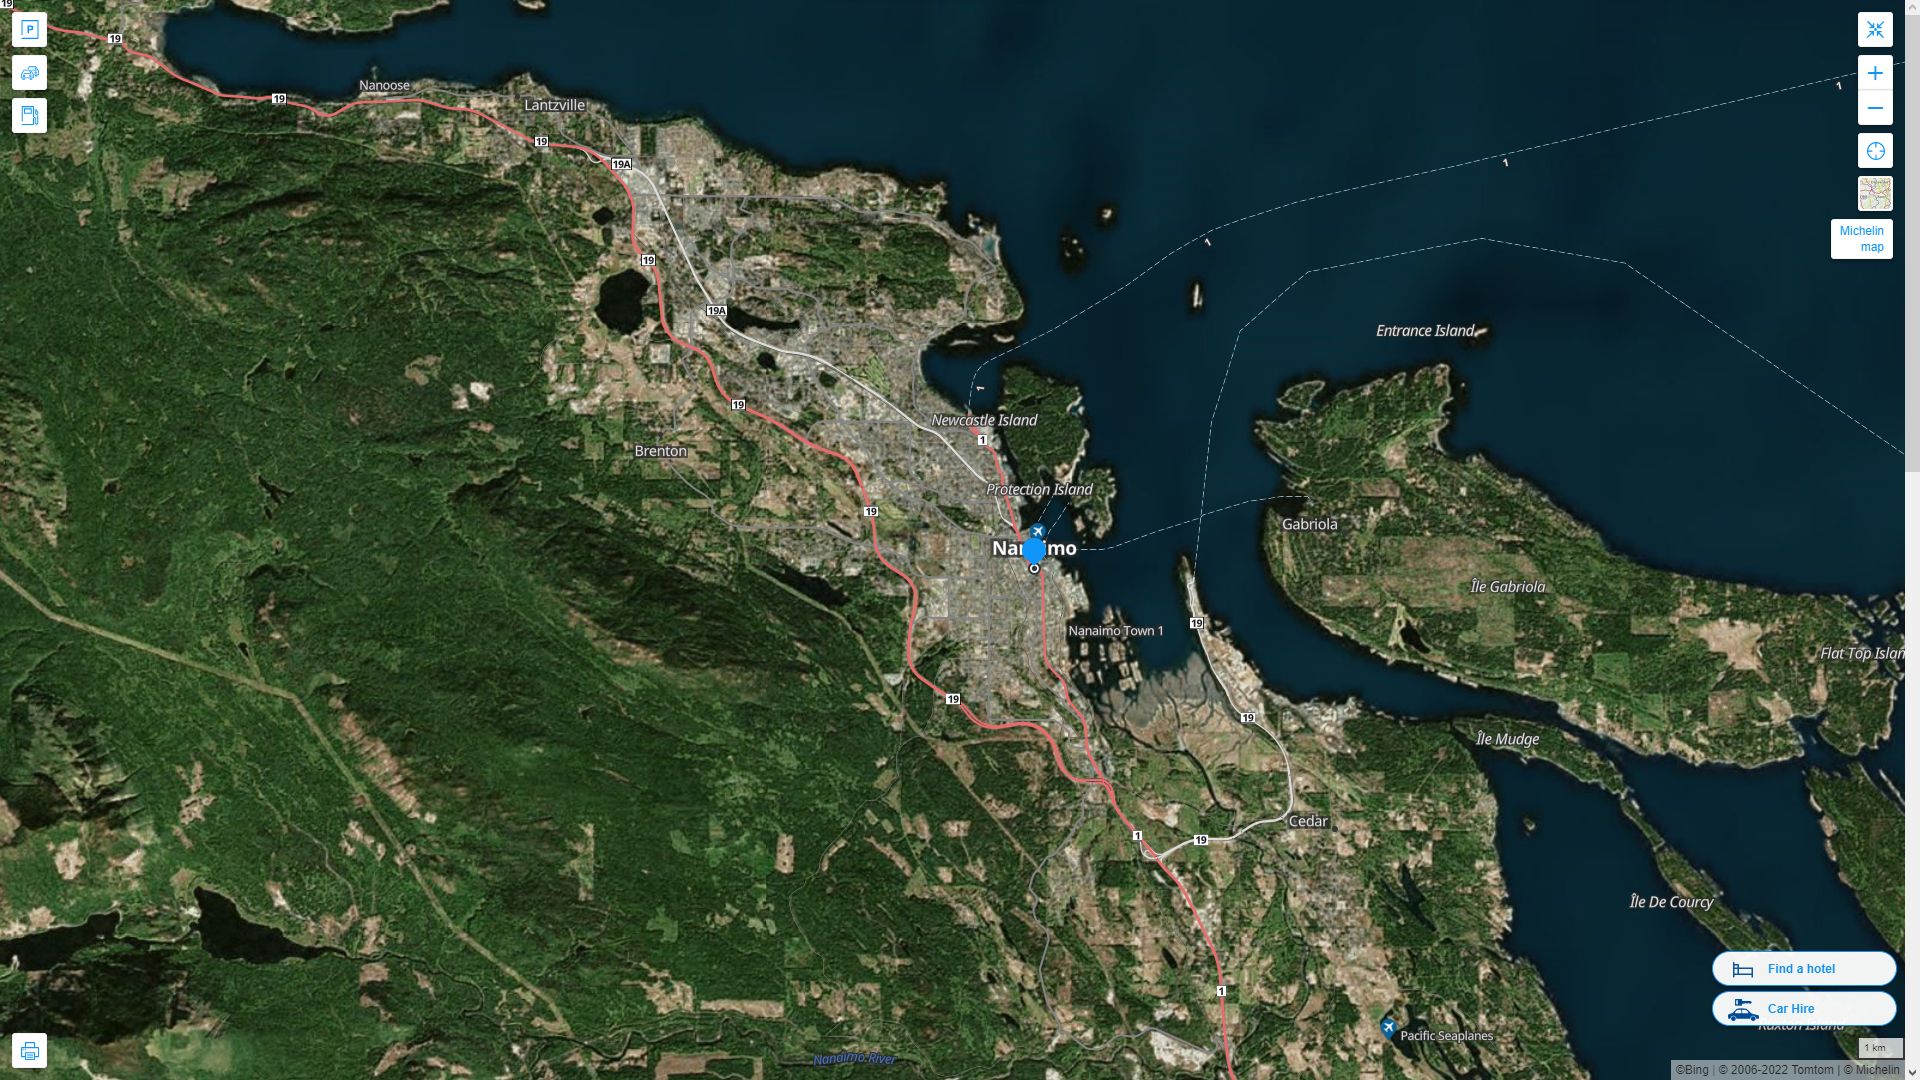 Nanaimo Highway and Road Map with Satellite View